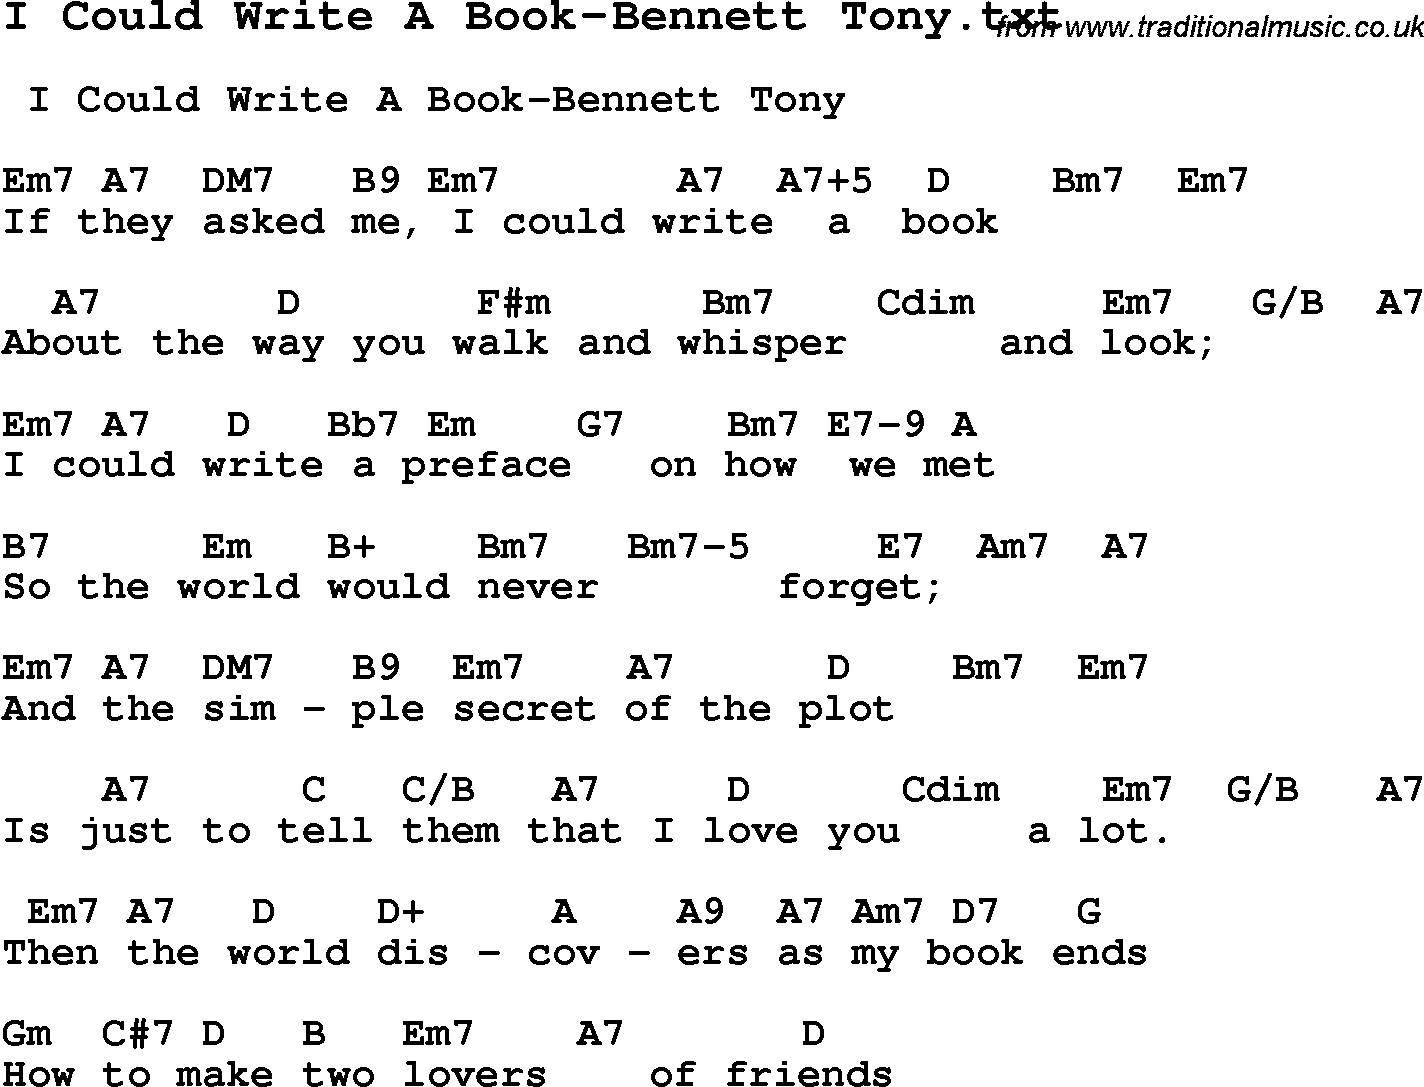 Jazz Song from top bands and vocal artists with chords, tabs and lyrics - I Could Write A Book-Bennett Tony